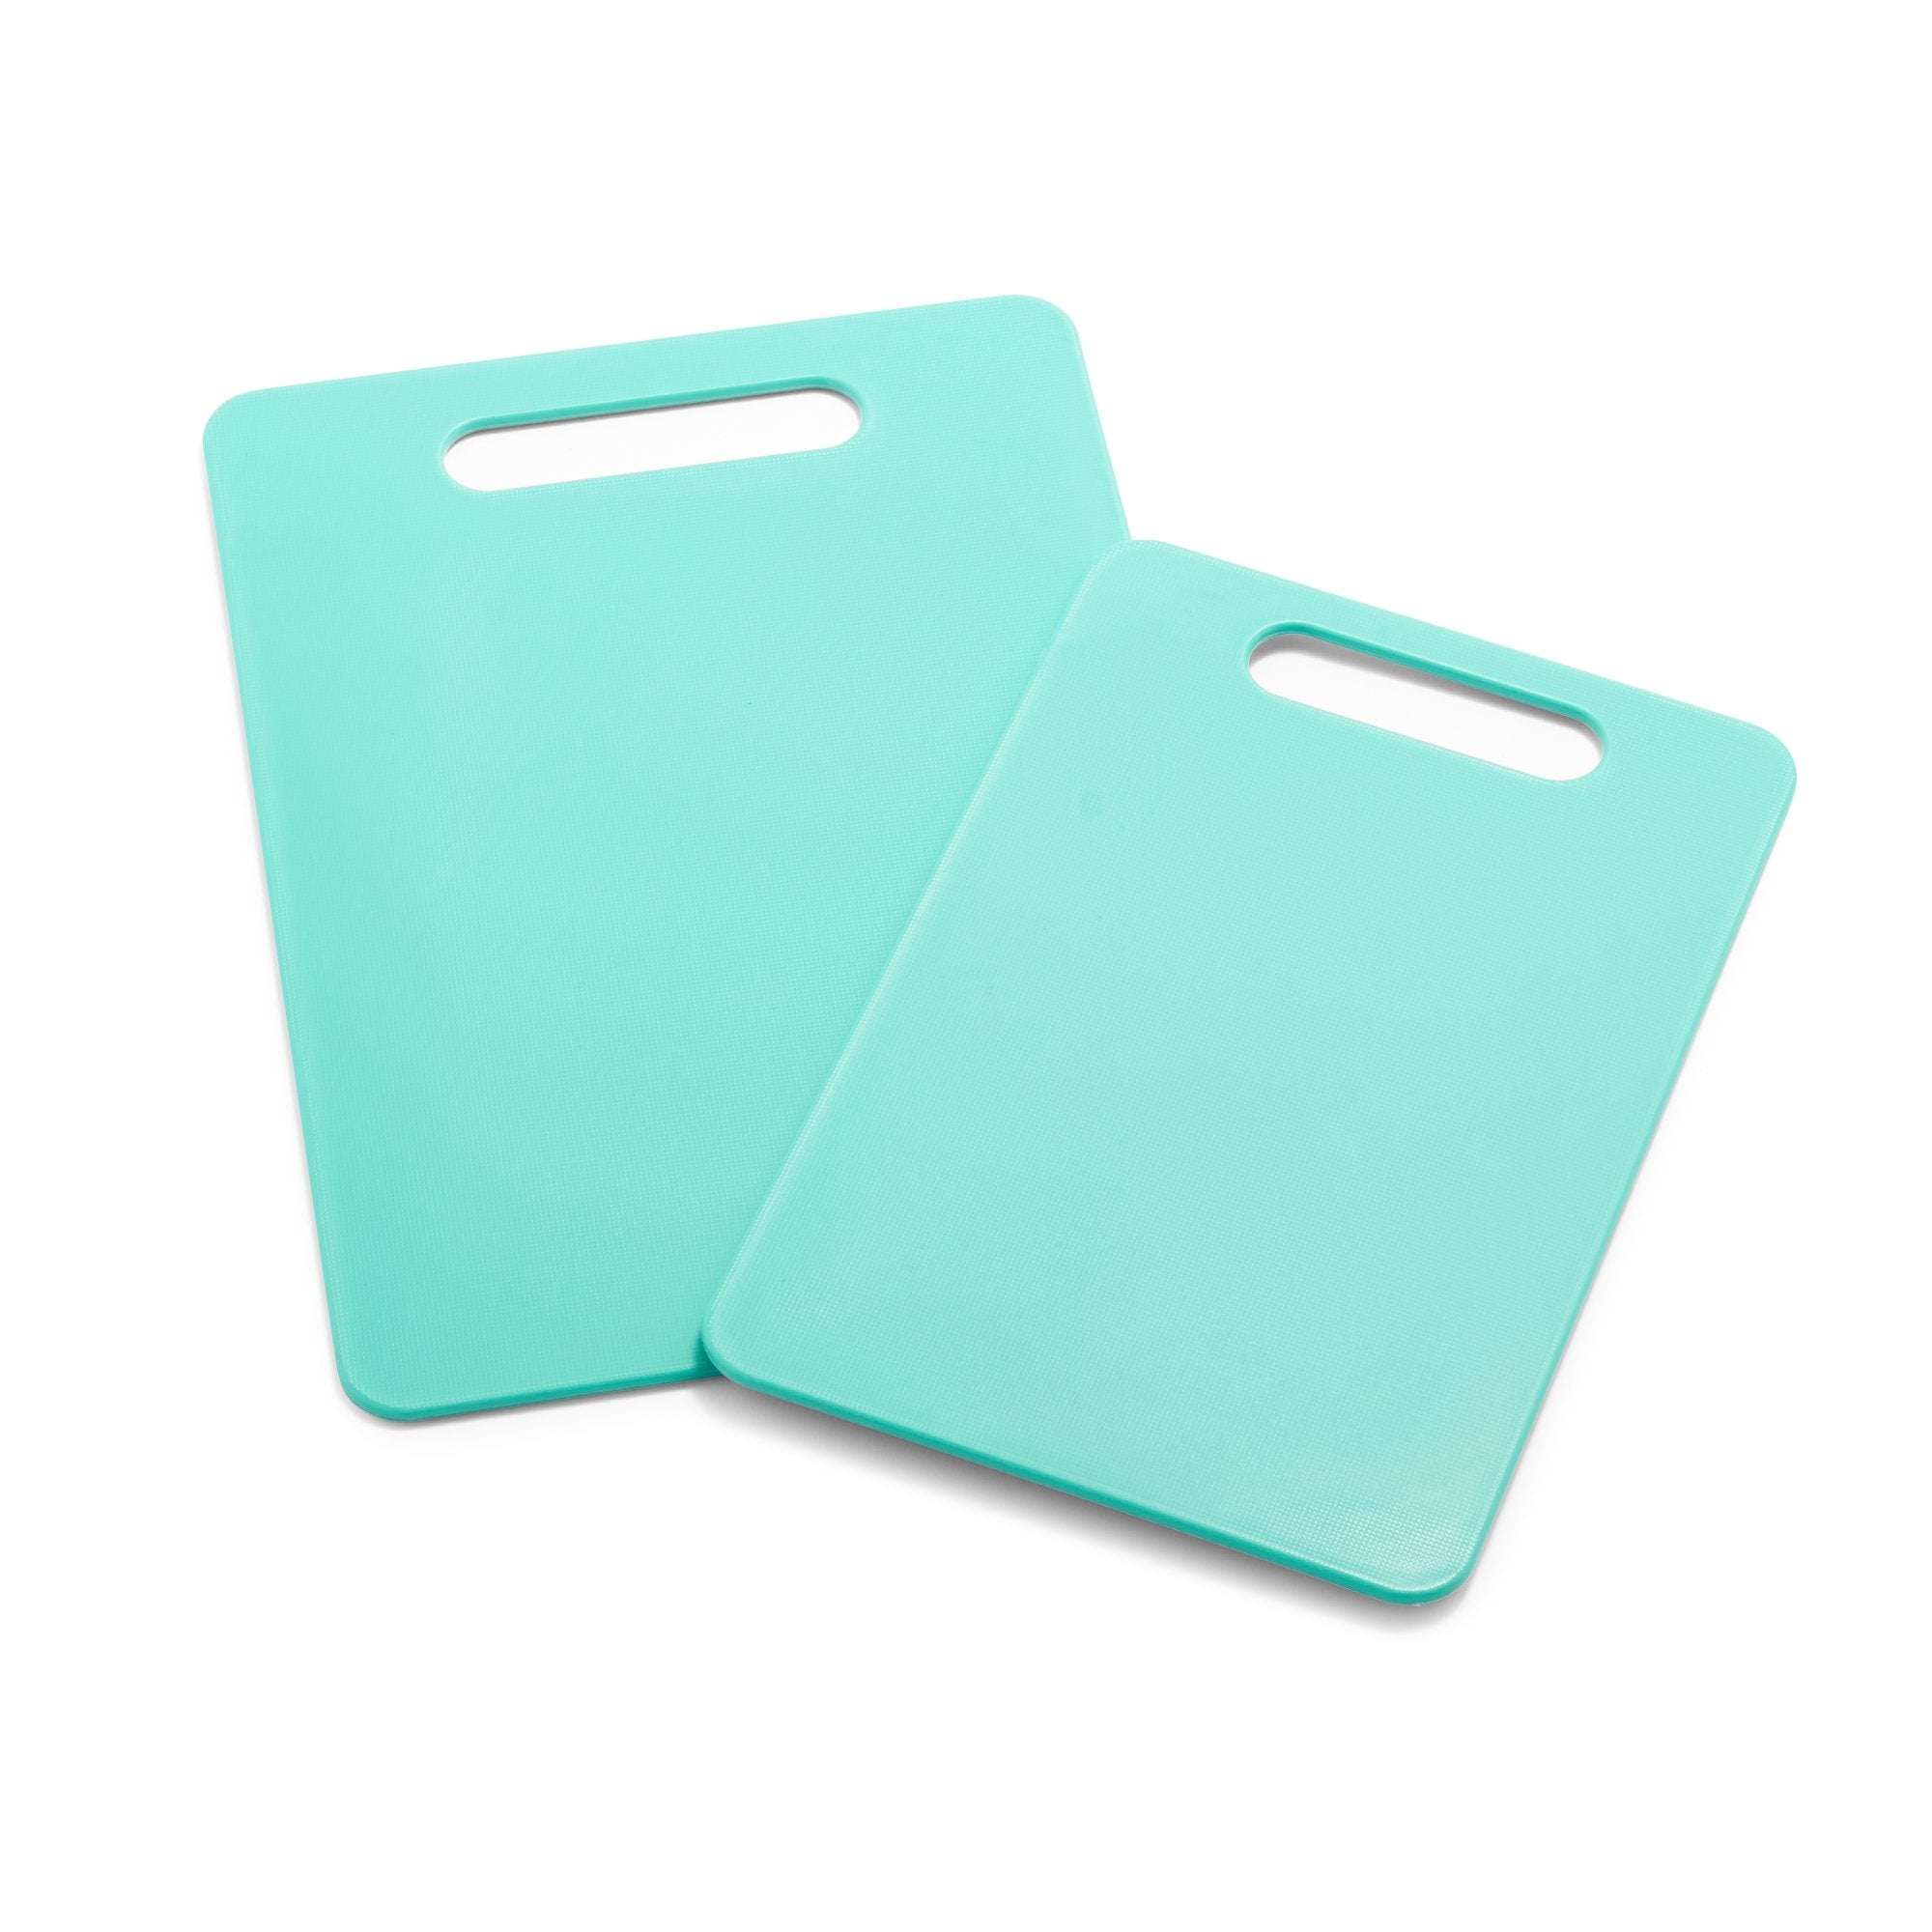 GreenLife Cutting Board Set, Turquoise